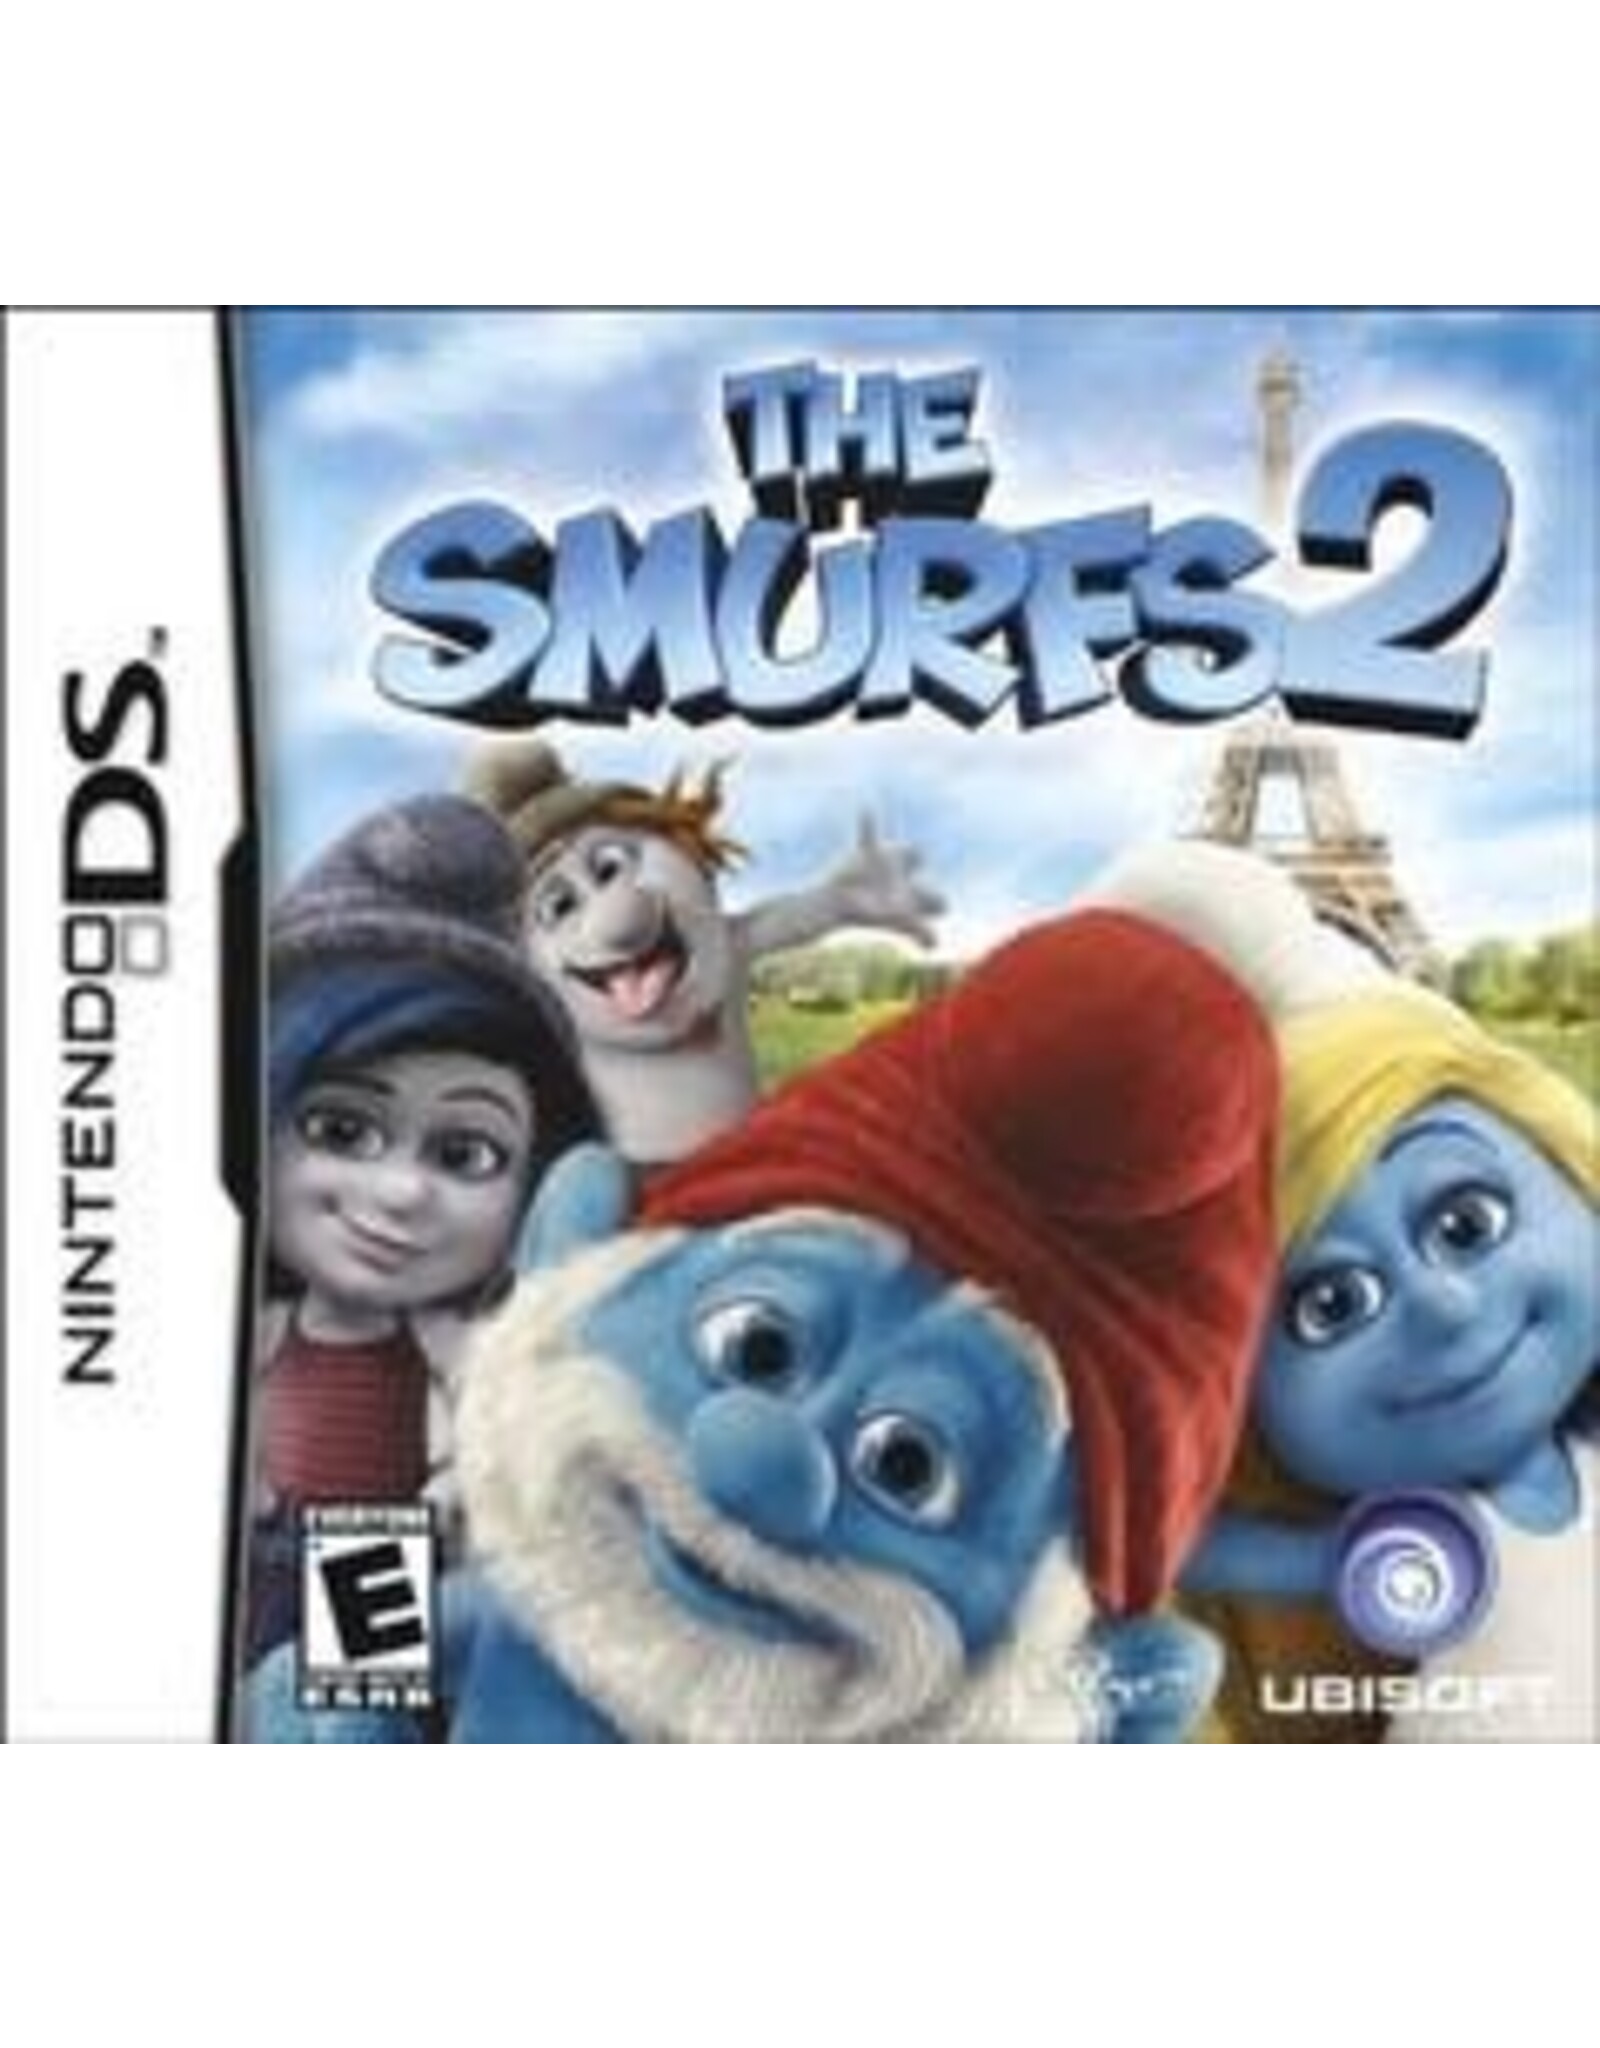 Nintendo DS Smurfs 2, The (Used)